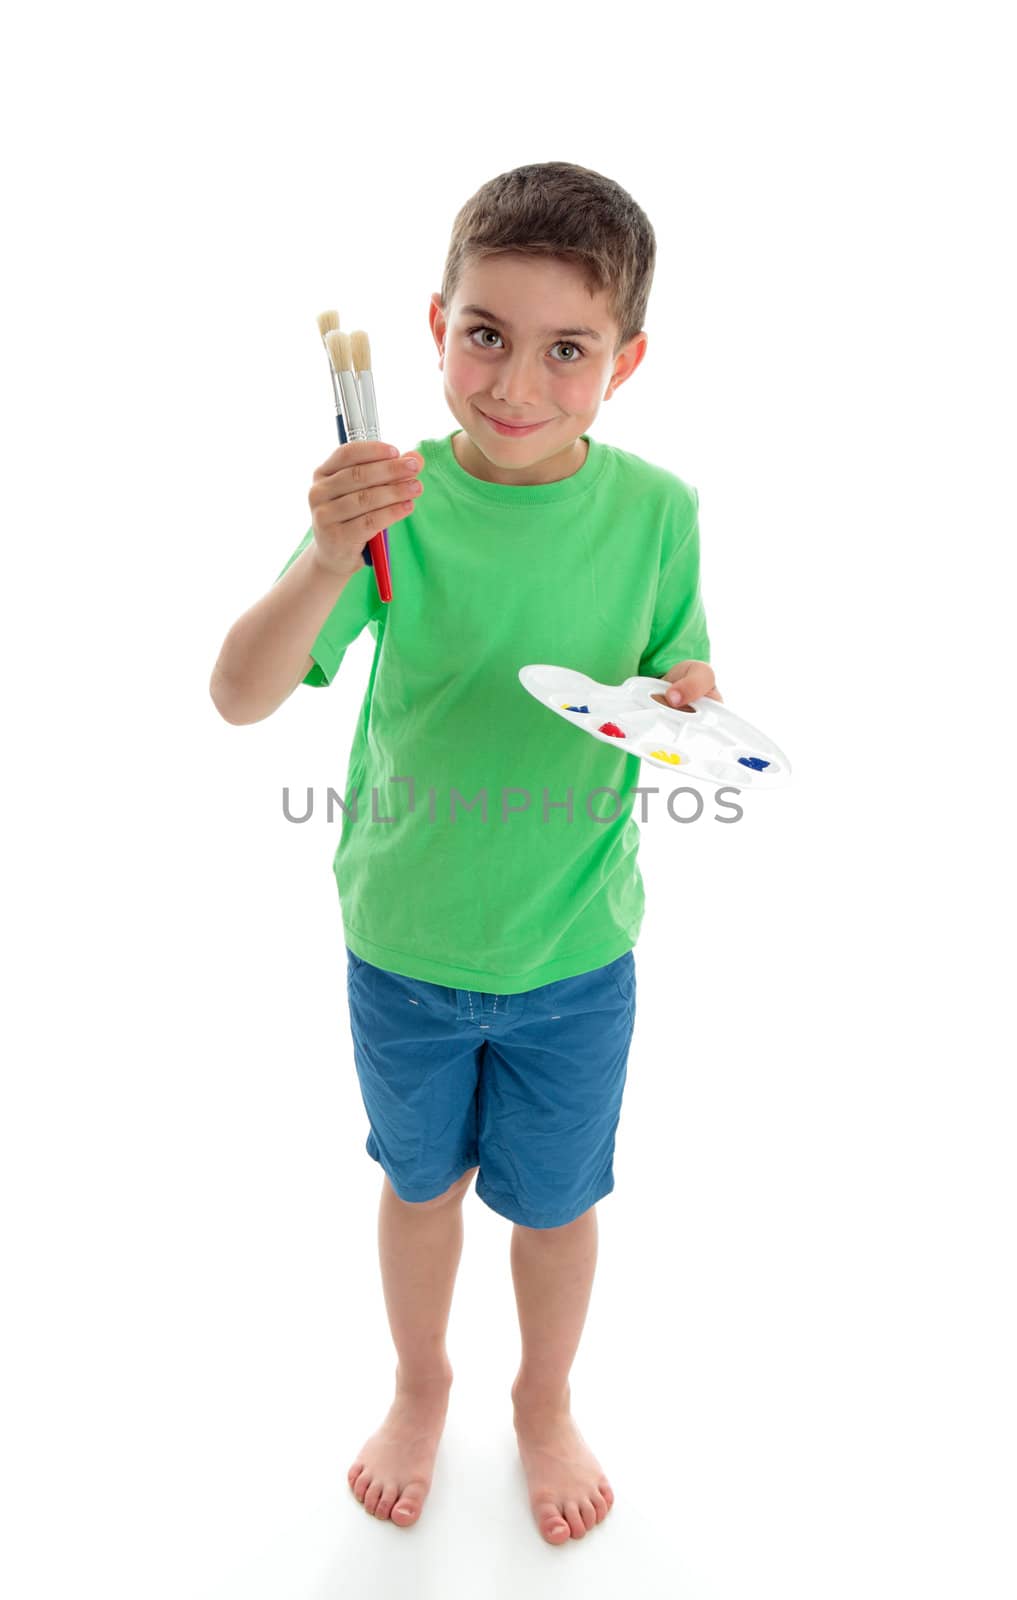 A young boy stands holding or showing paints and paint brushes.  White background.